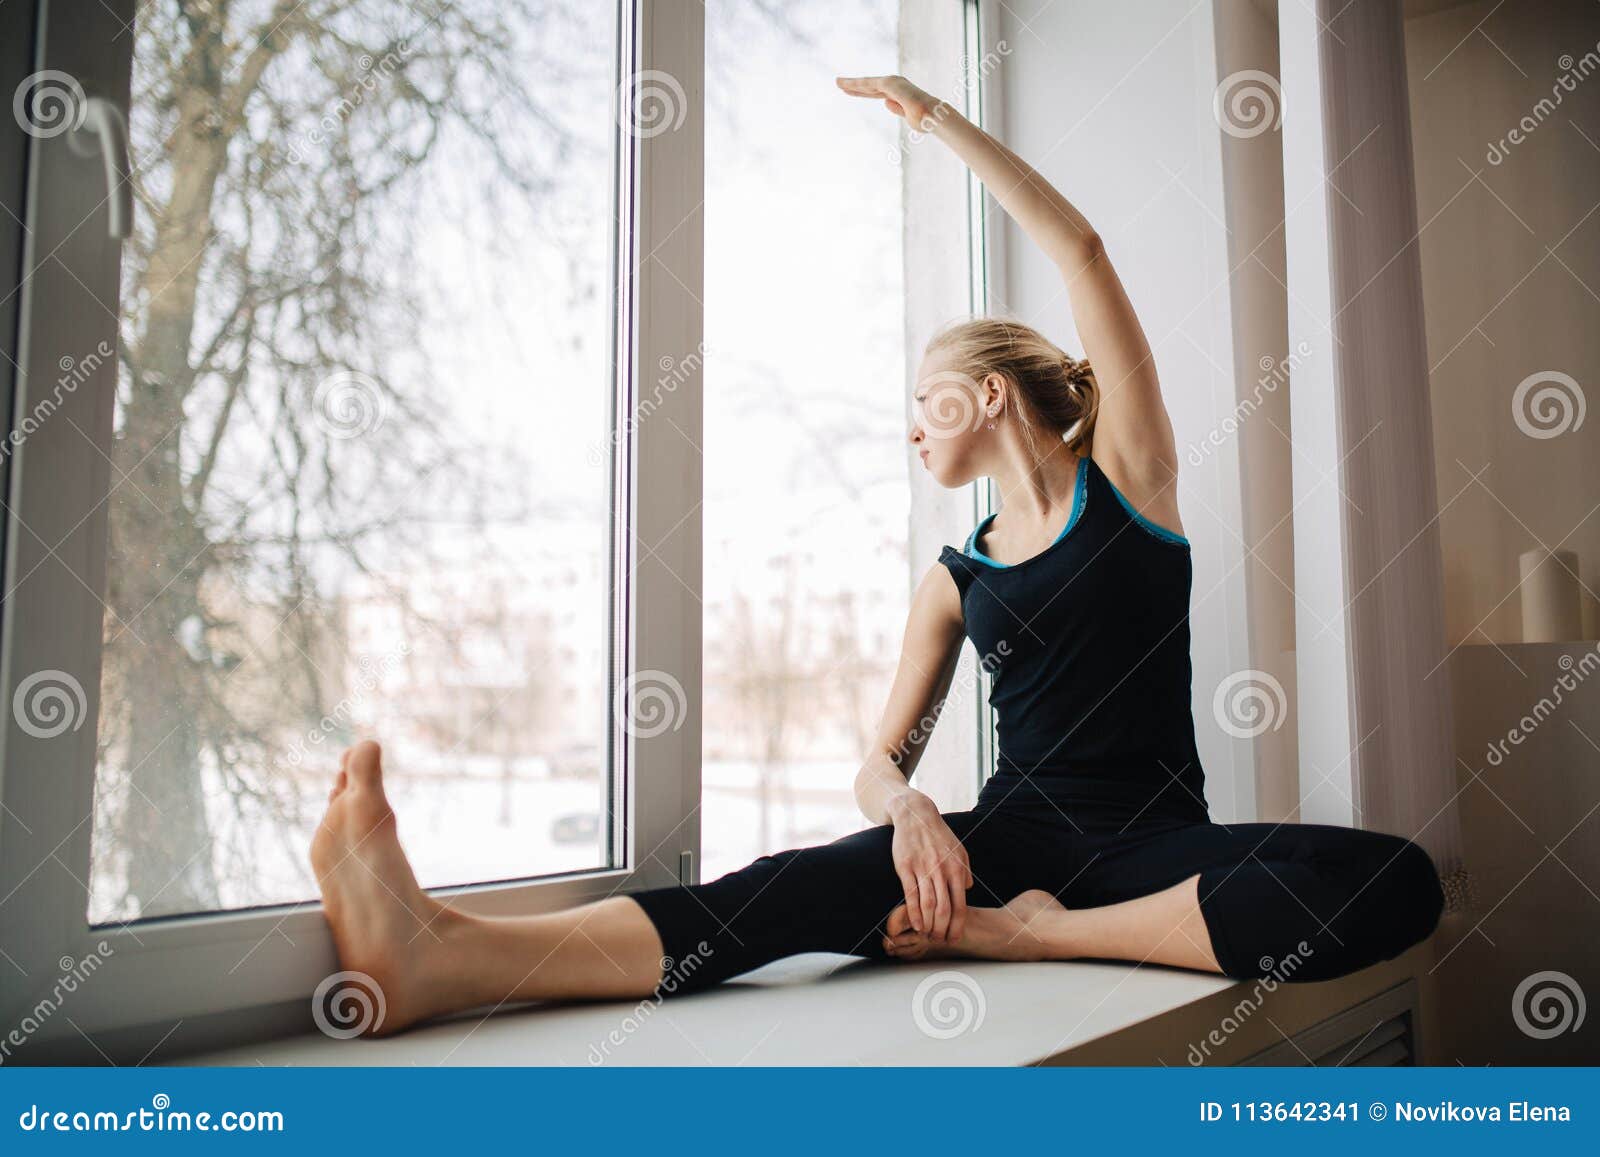 Pretty Athletic Blonde Girl in Black Sportswear Sitting Near Window Looking Out. Fitness Concept. Stock - Image of holding, active: 113642341